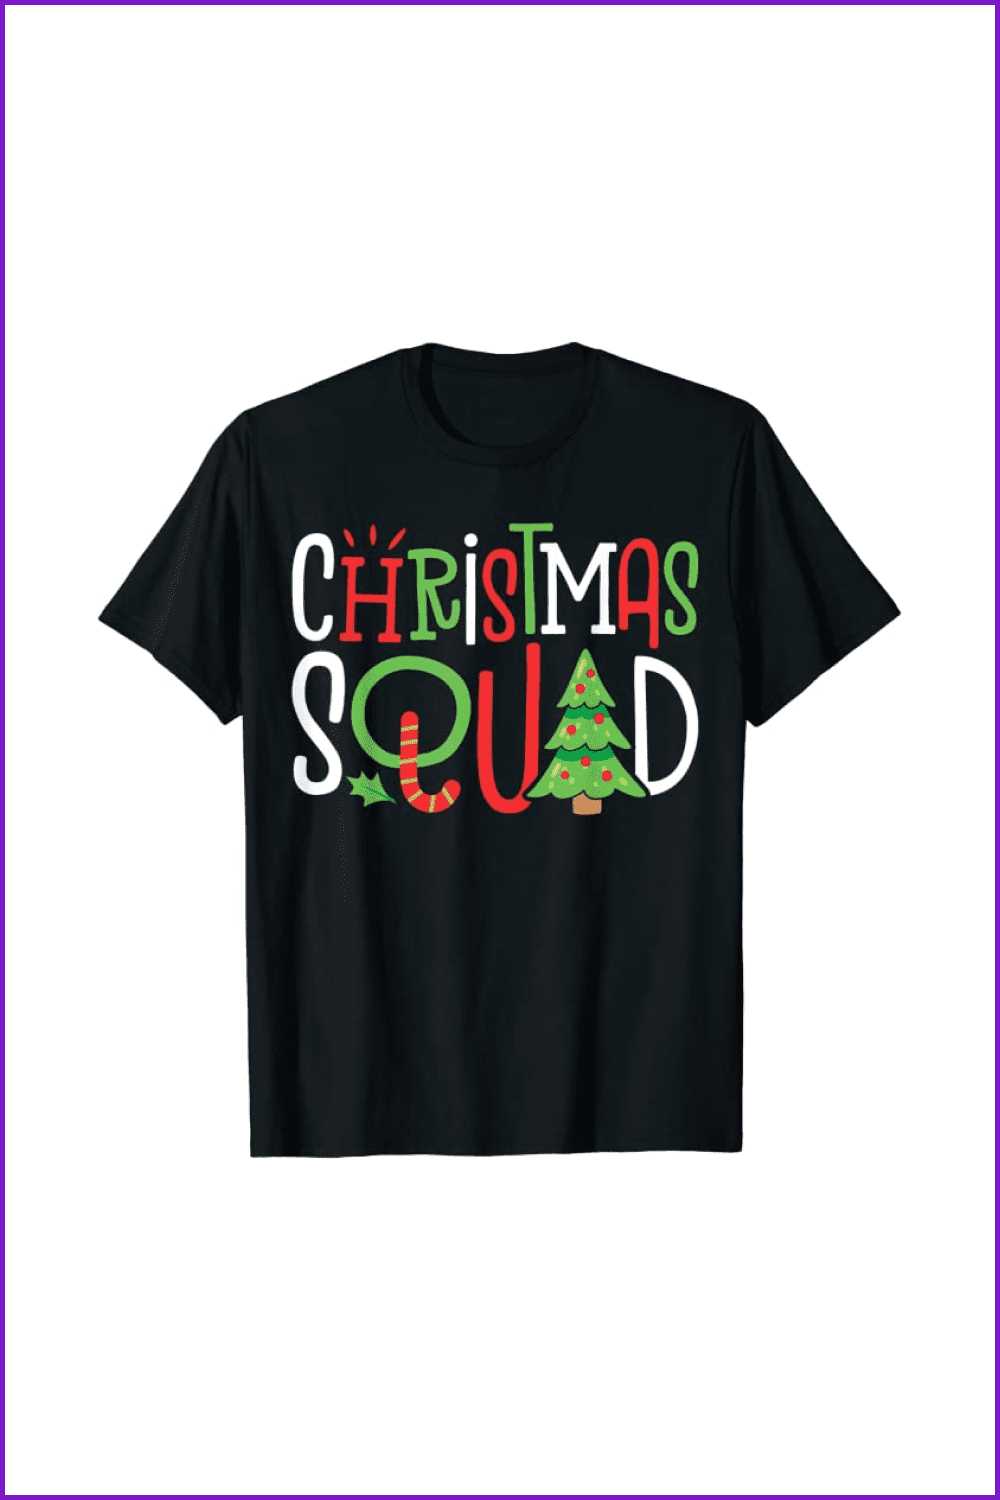 Black t-shшке with combination of white, red, and green letters and interesting holiday symbols.